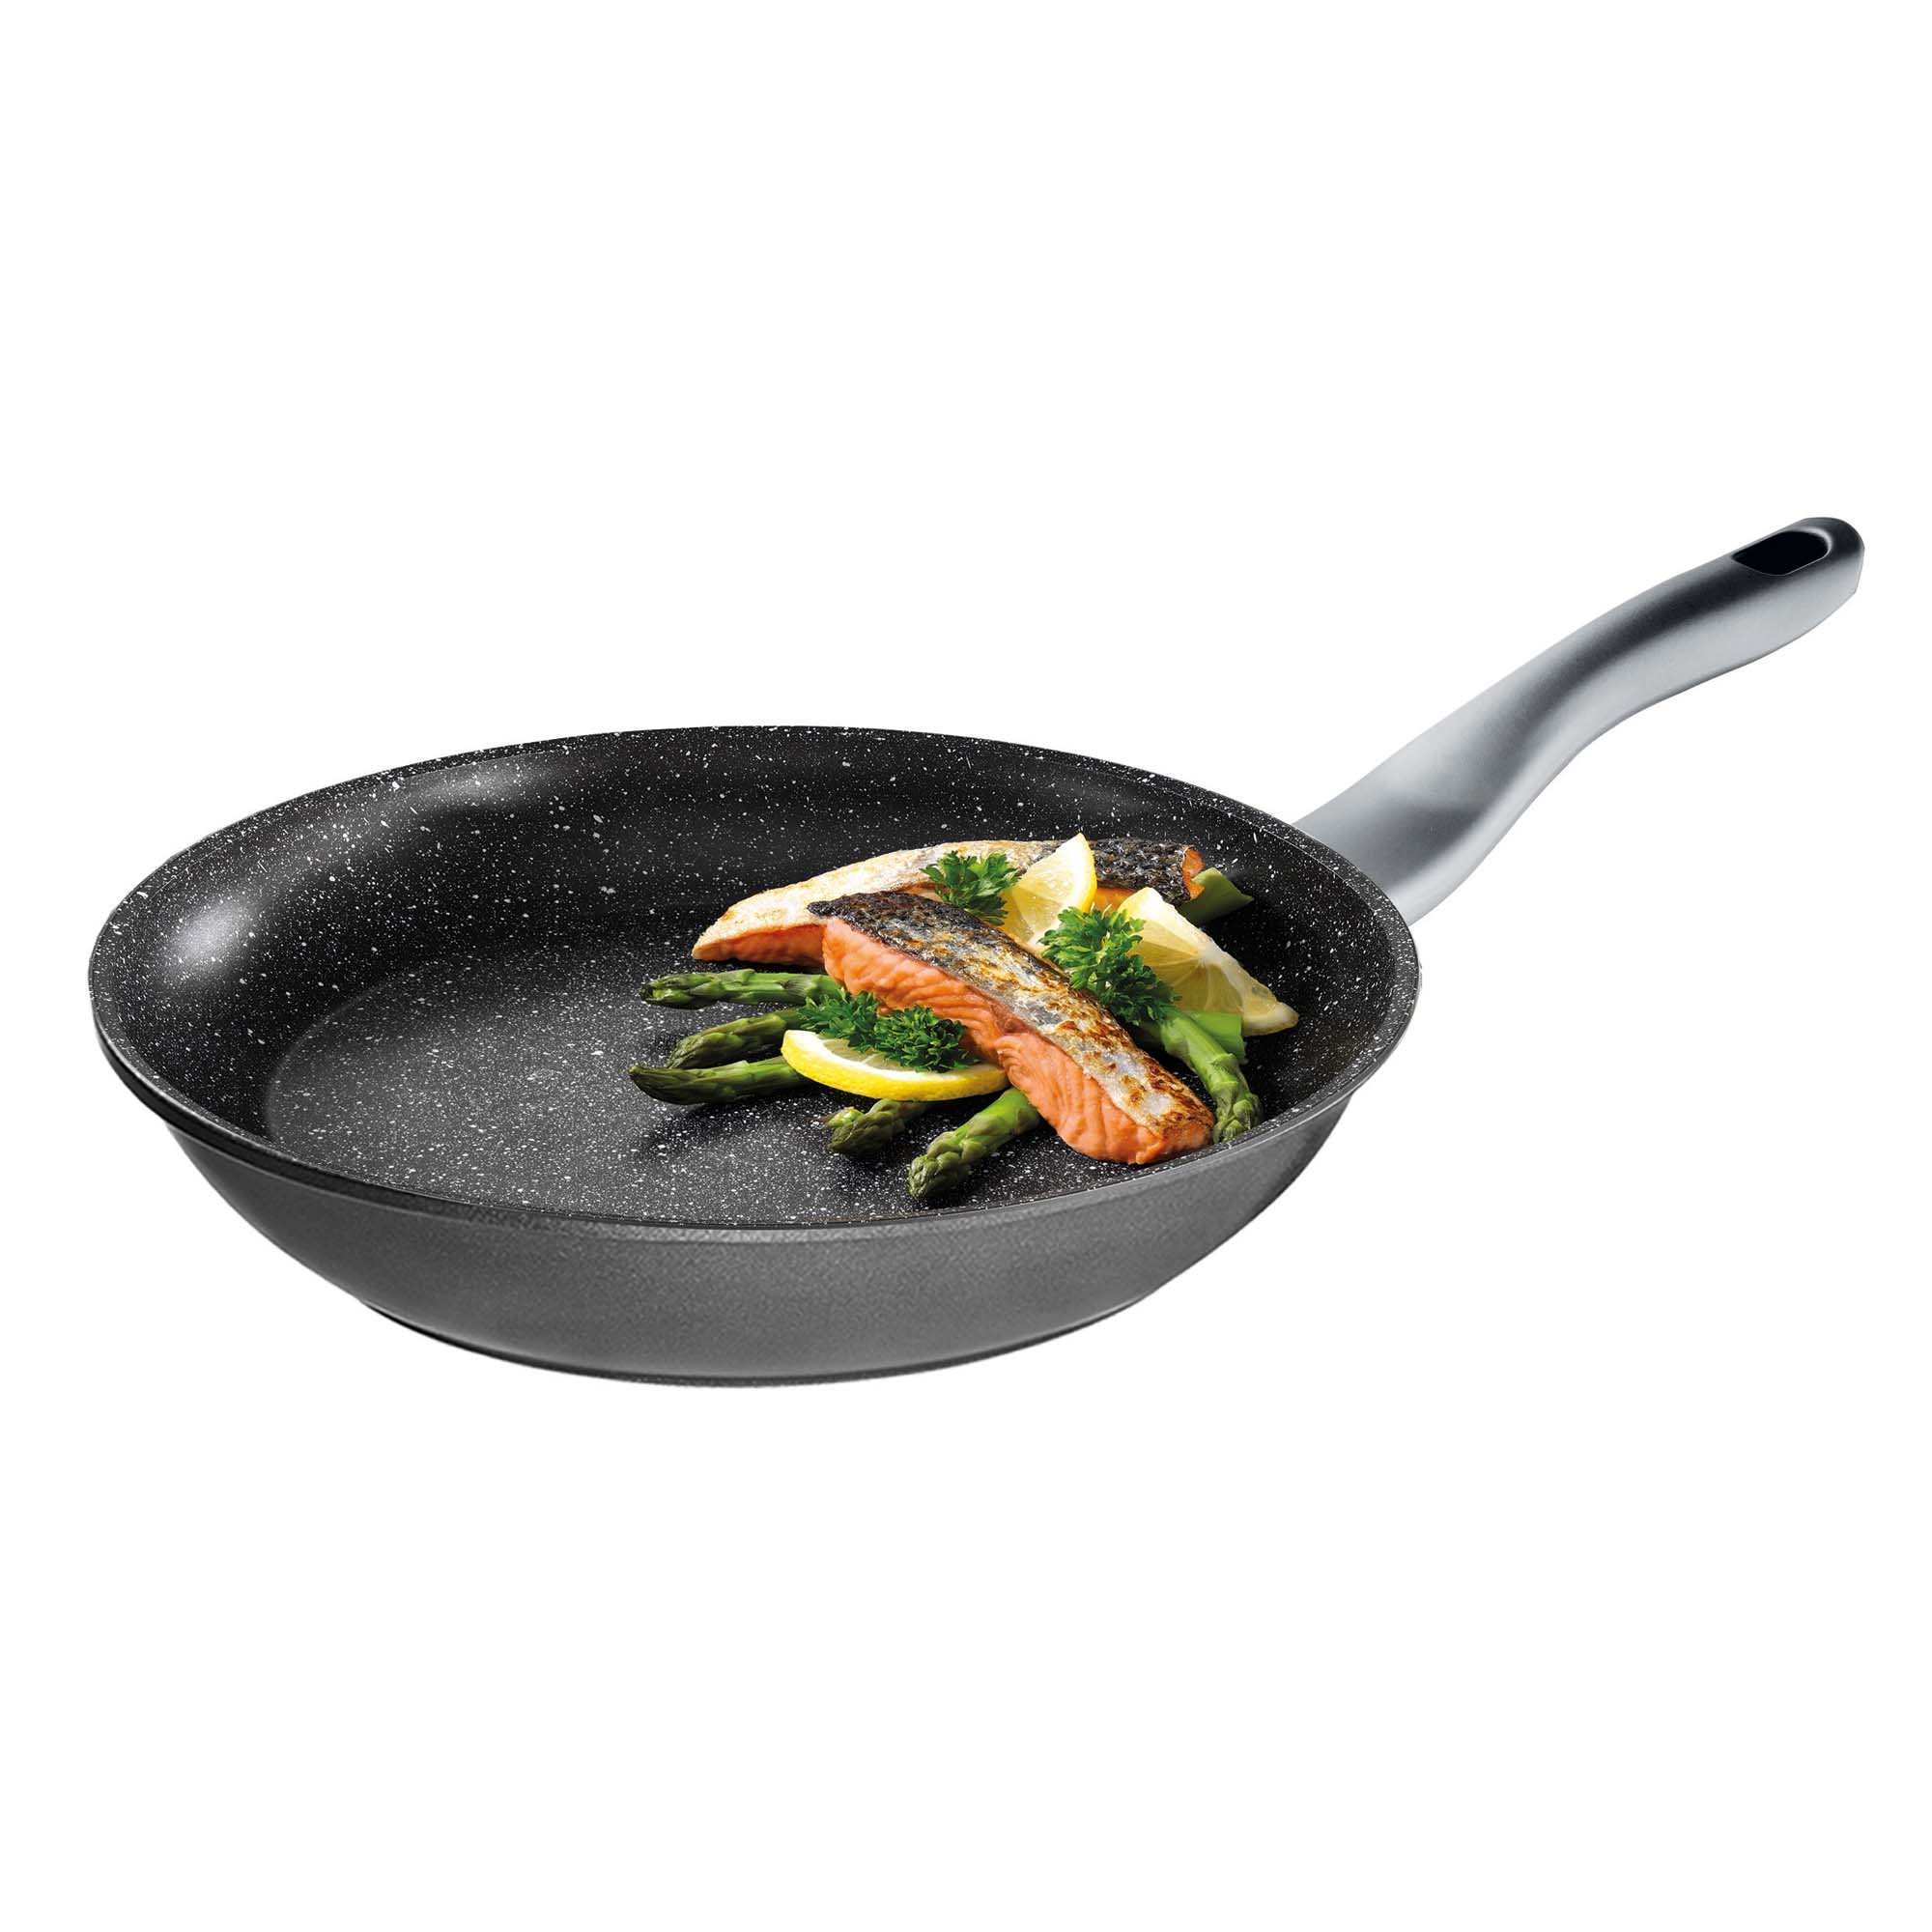 STONELINE® FRESH frying pan 28 cm, Made in Germany, non-stick, induction and oven-safe